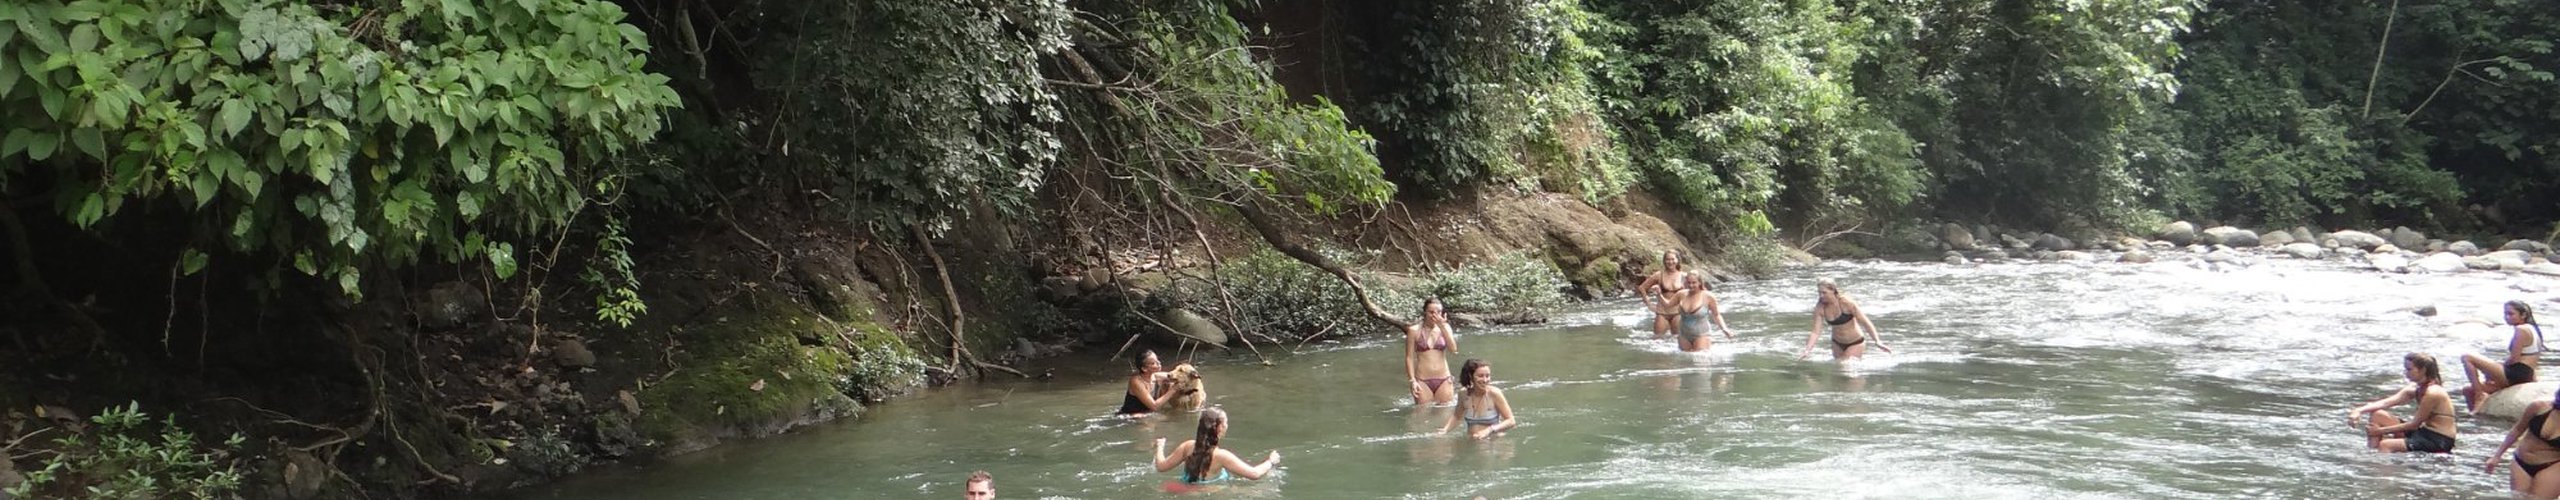 the river is a fun way